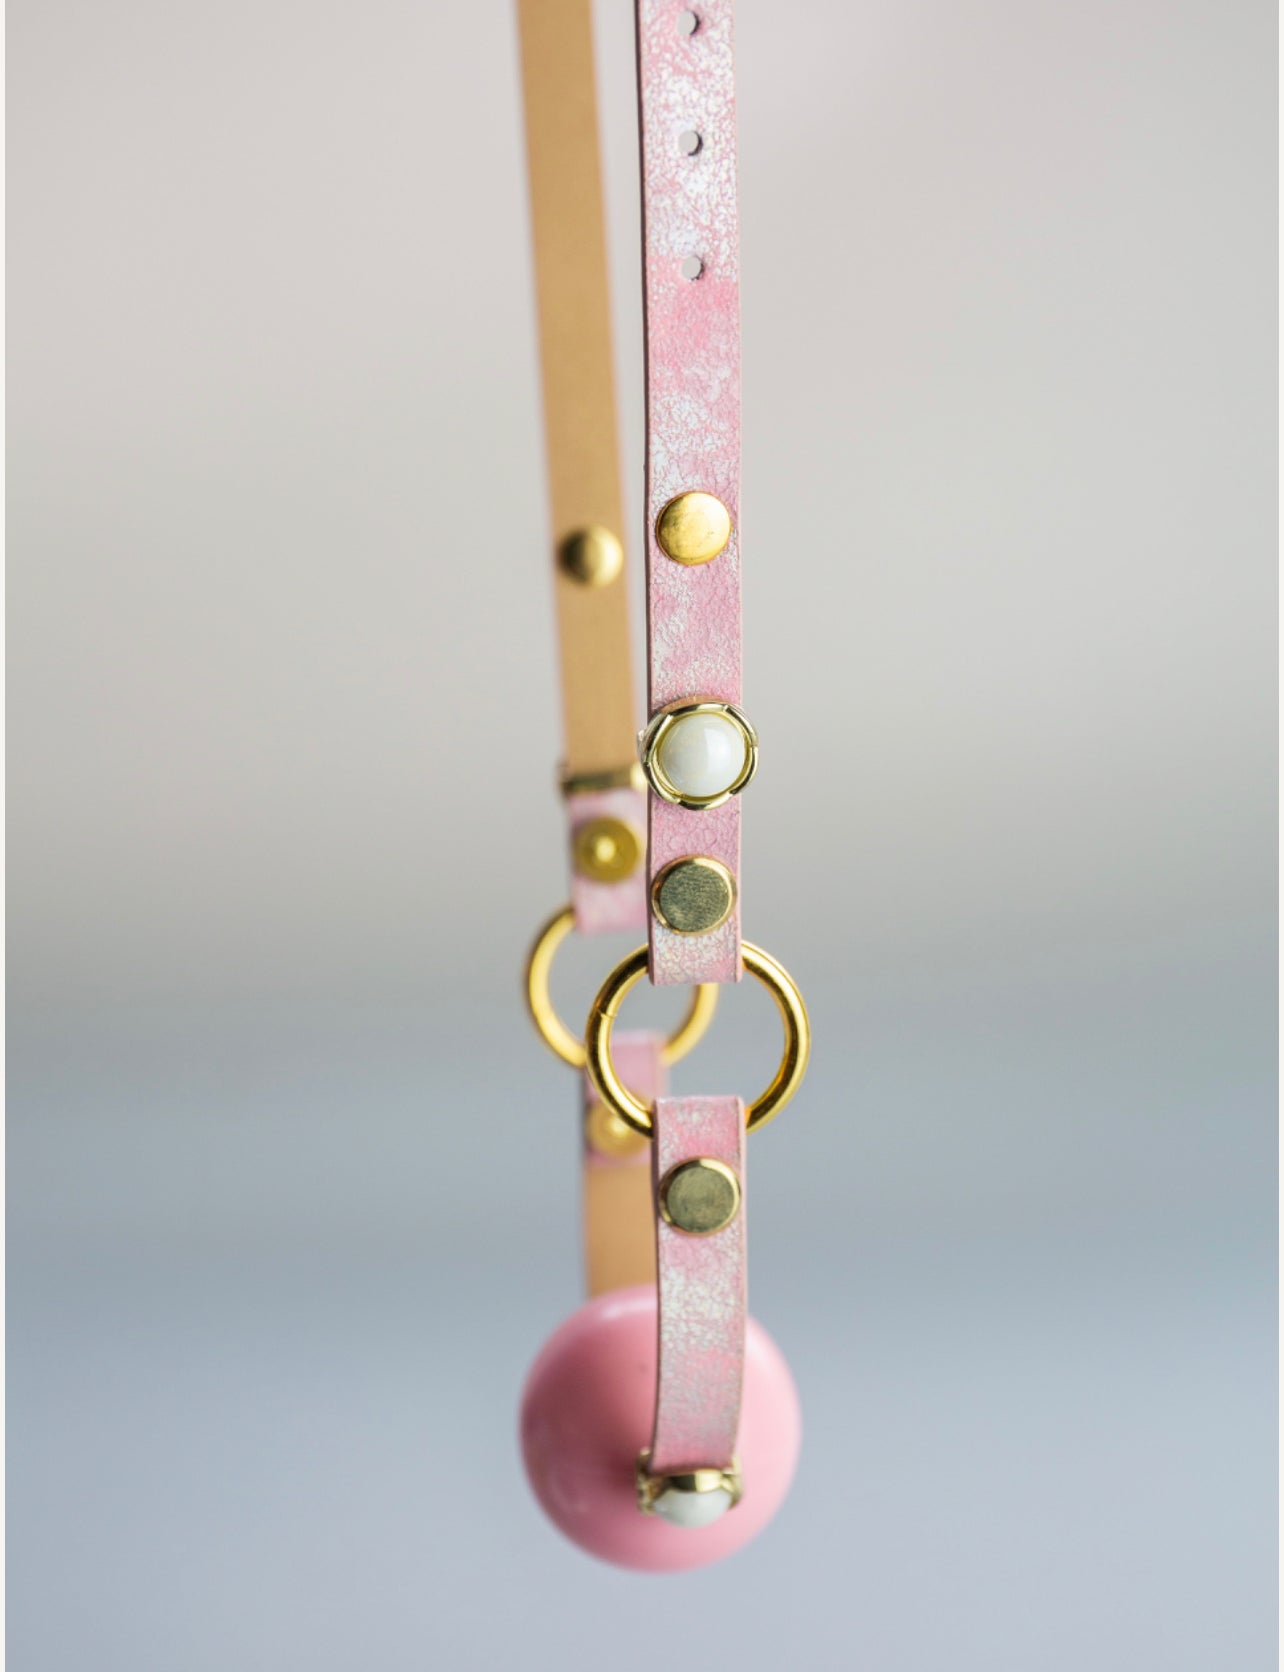 Pink & Pearled Gag by KxB